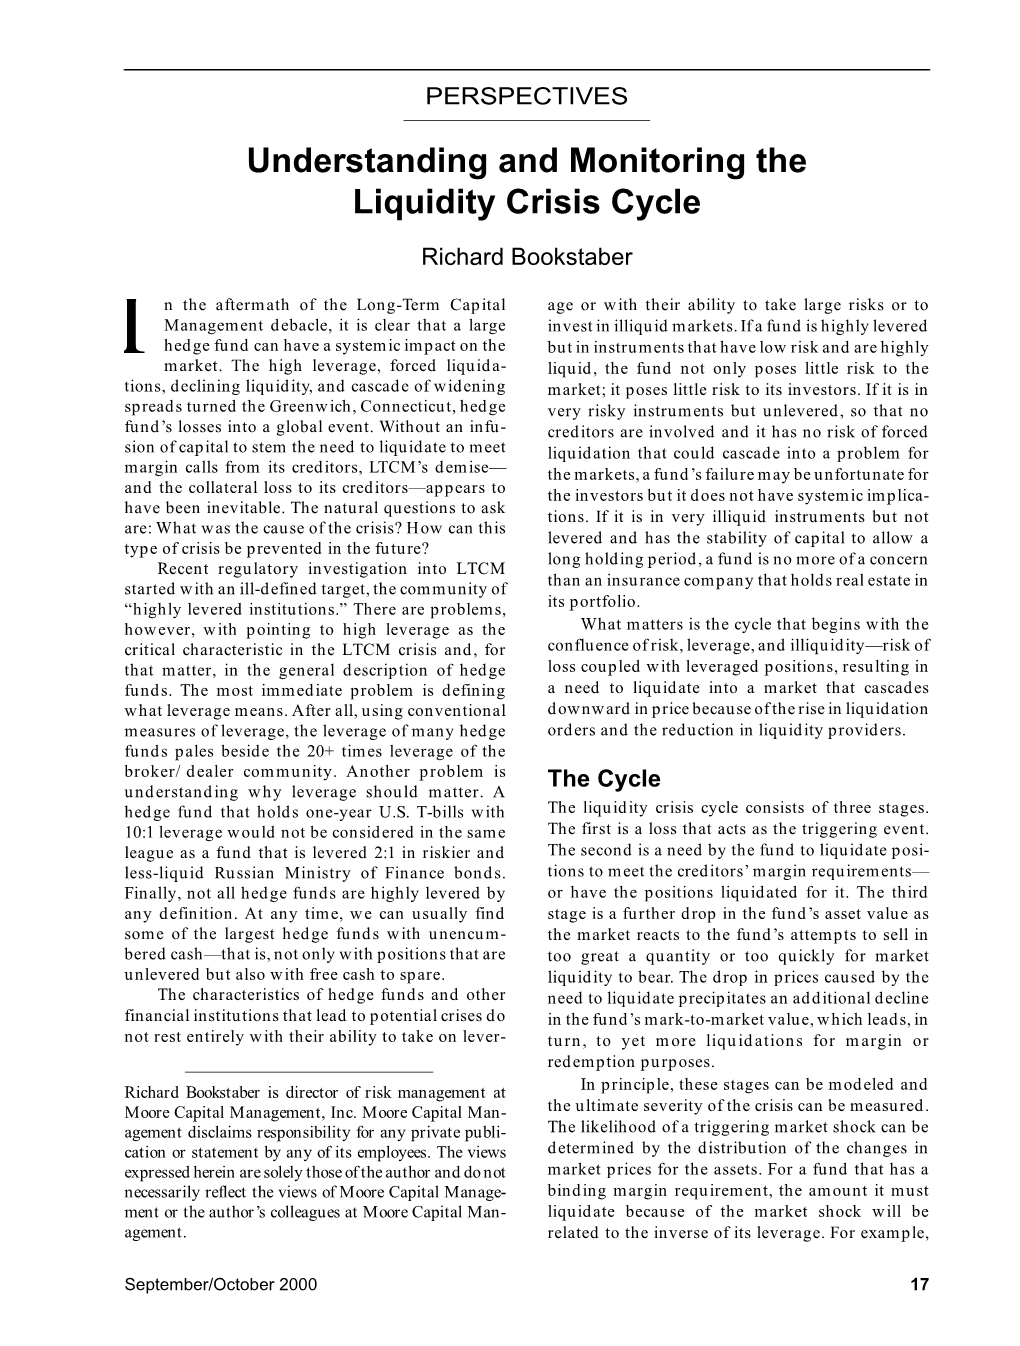 Understanding and Monitoring the Liquidity Crisis Cycle